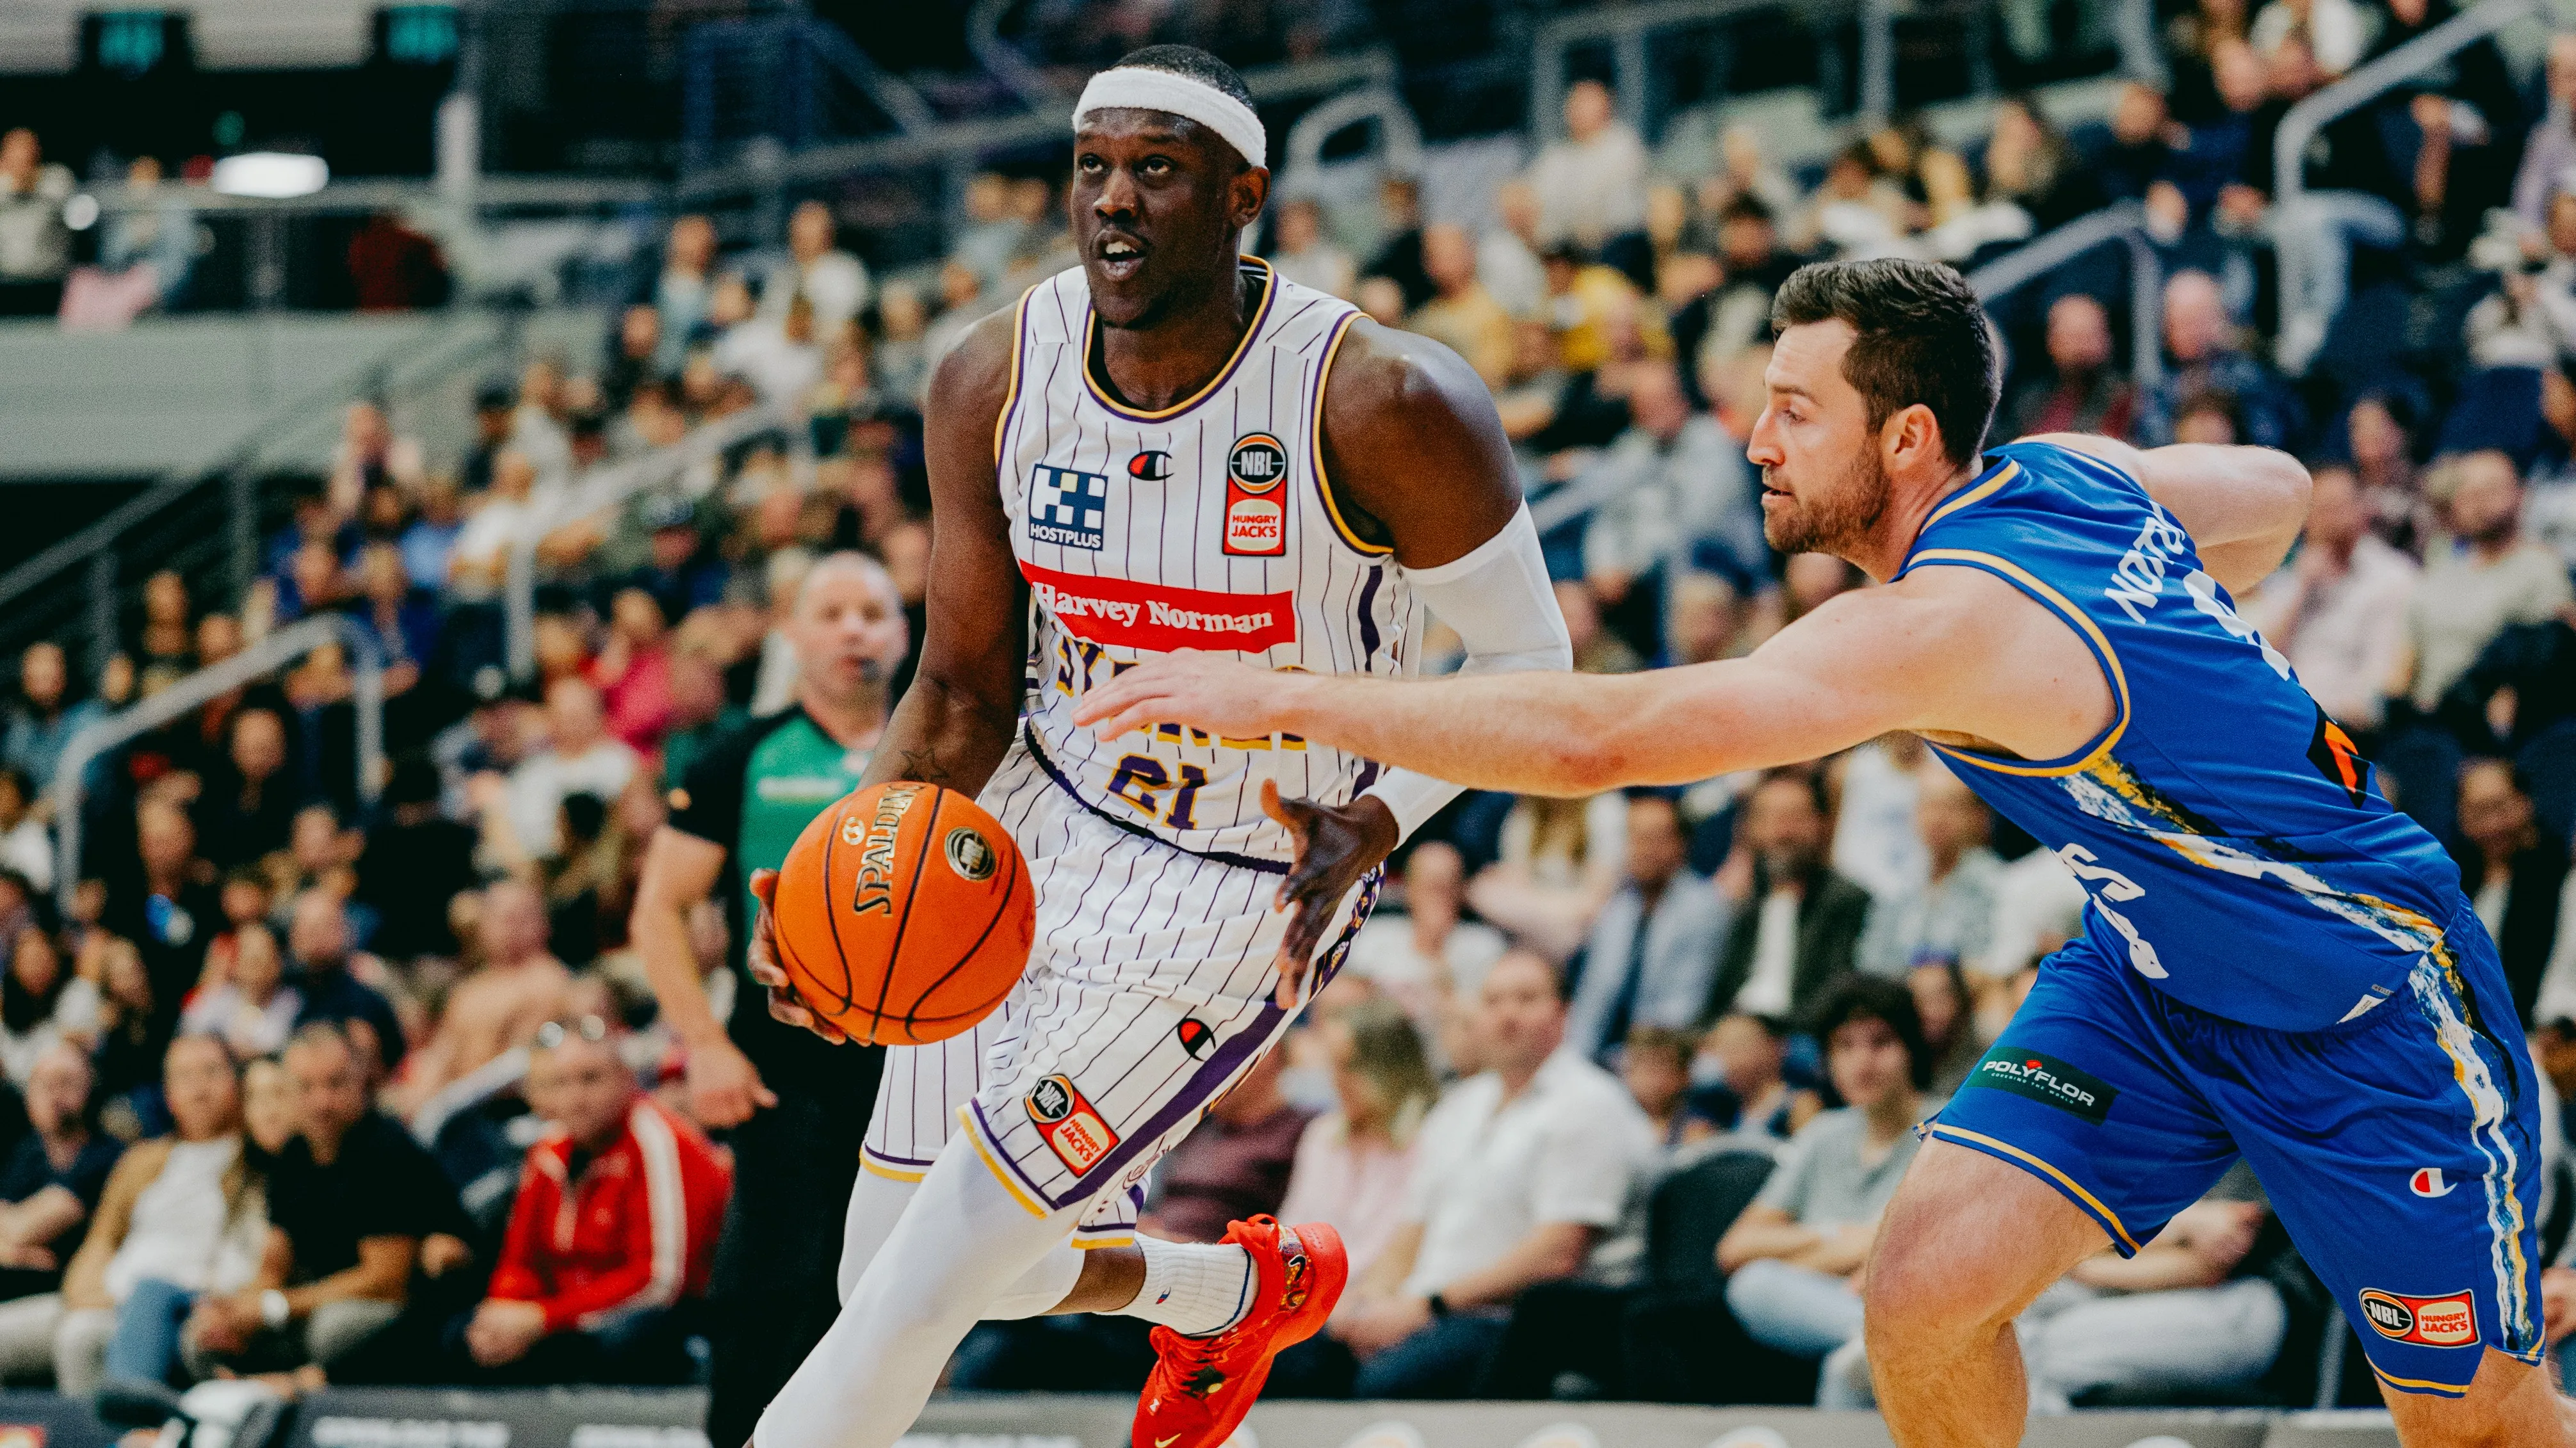 Melbourne Tigers beat Sydney Kings to maintain NBL lead